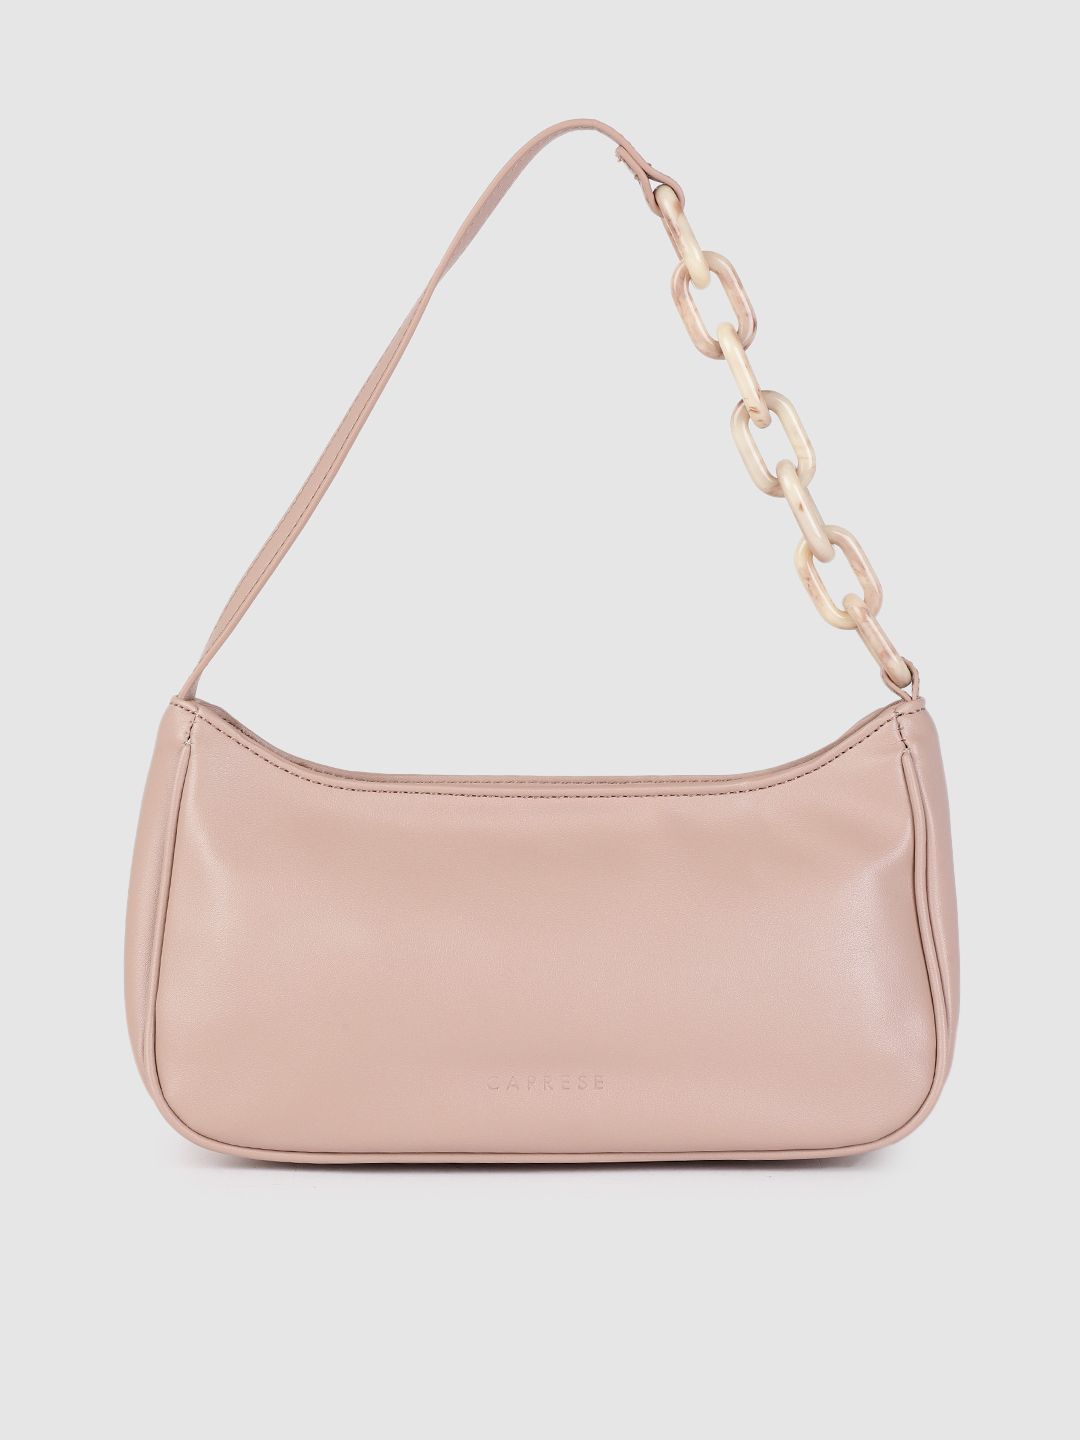 Caprese Pink Structured Hobo Bag Price in India